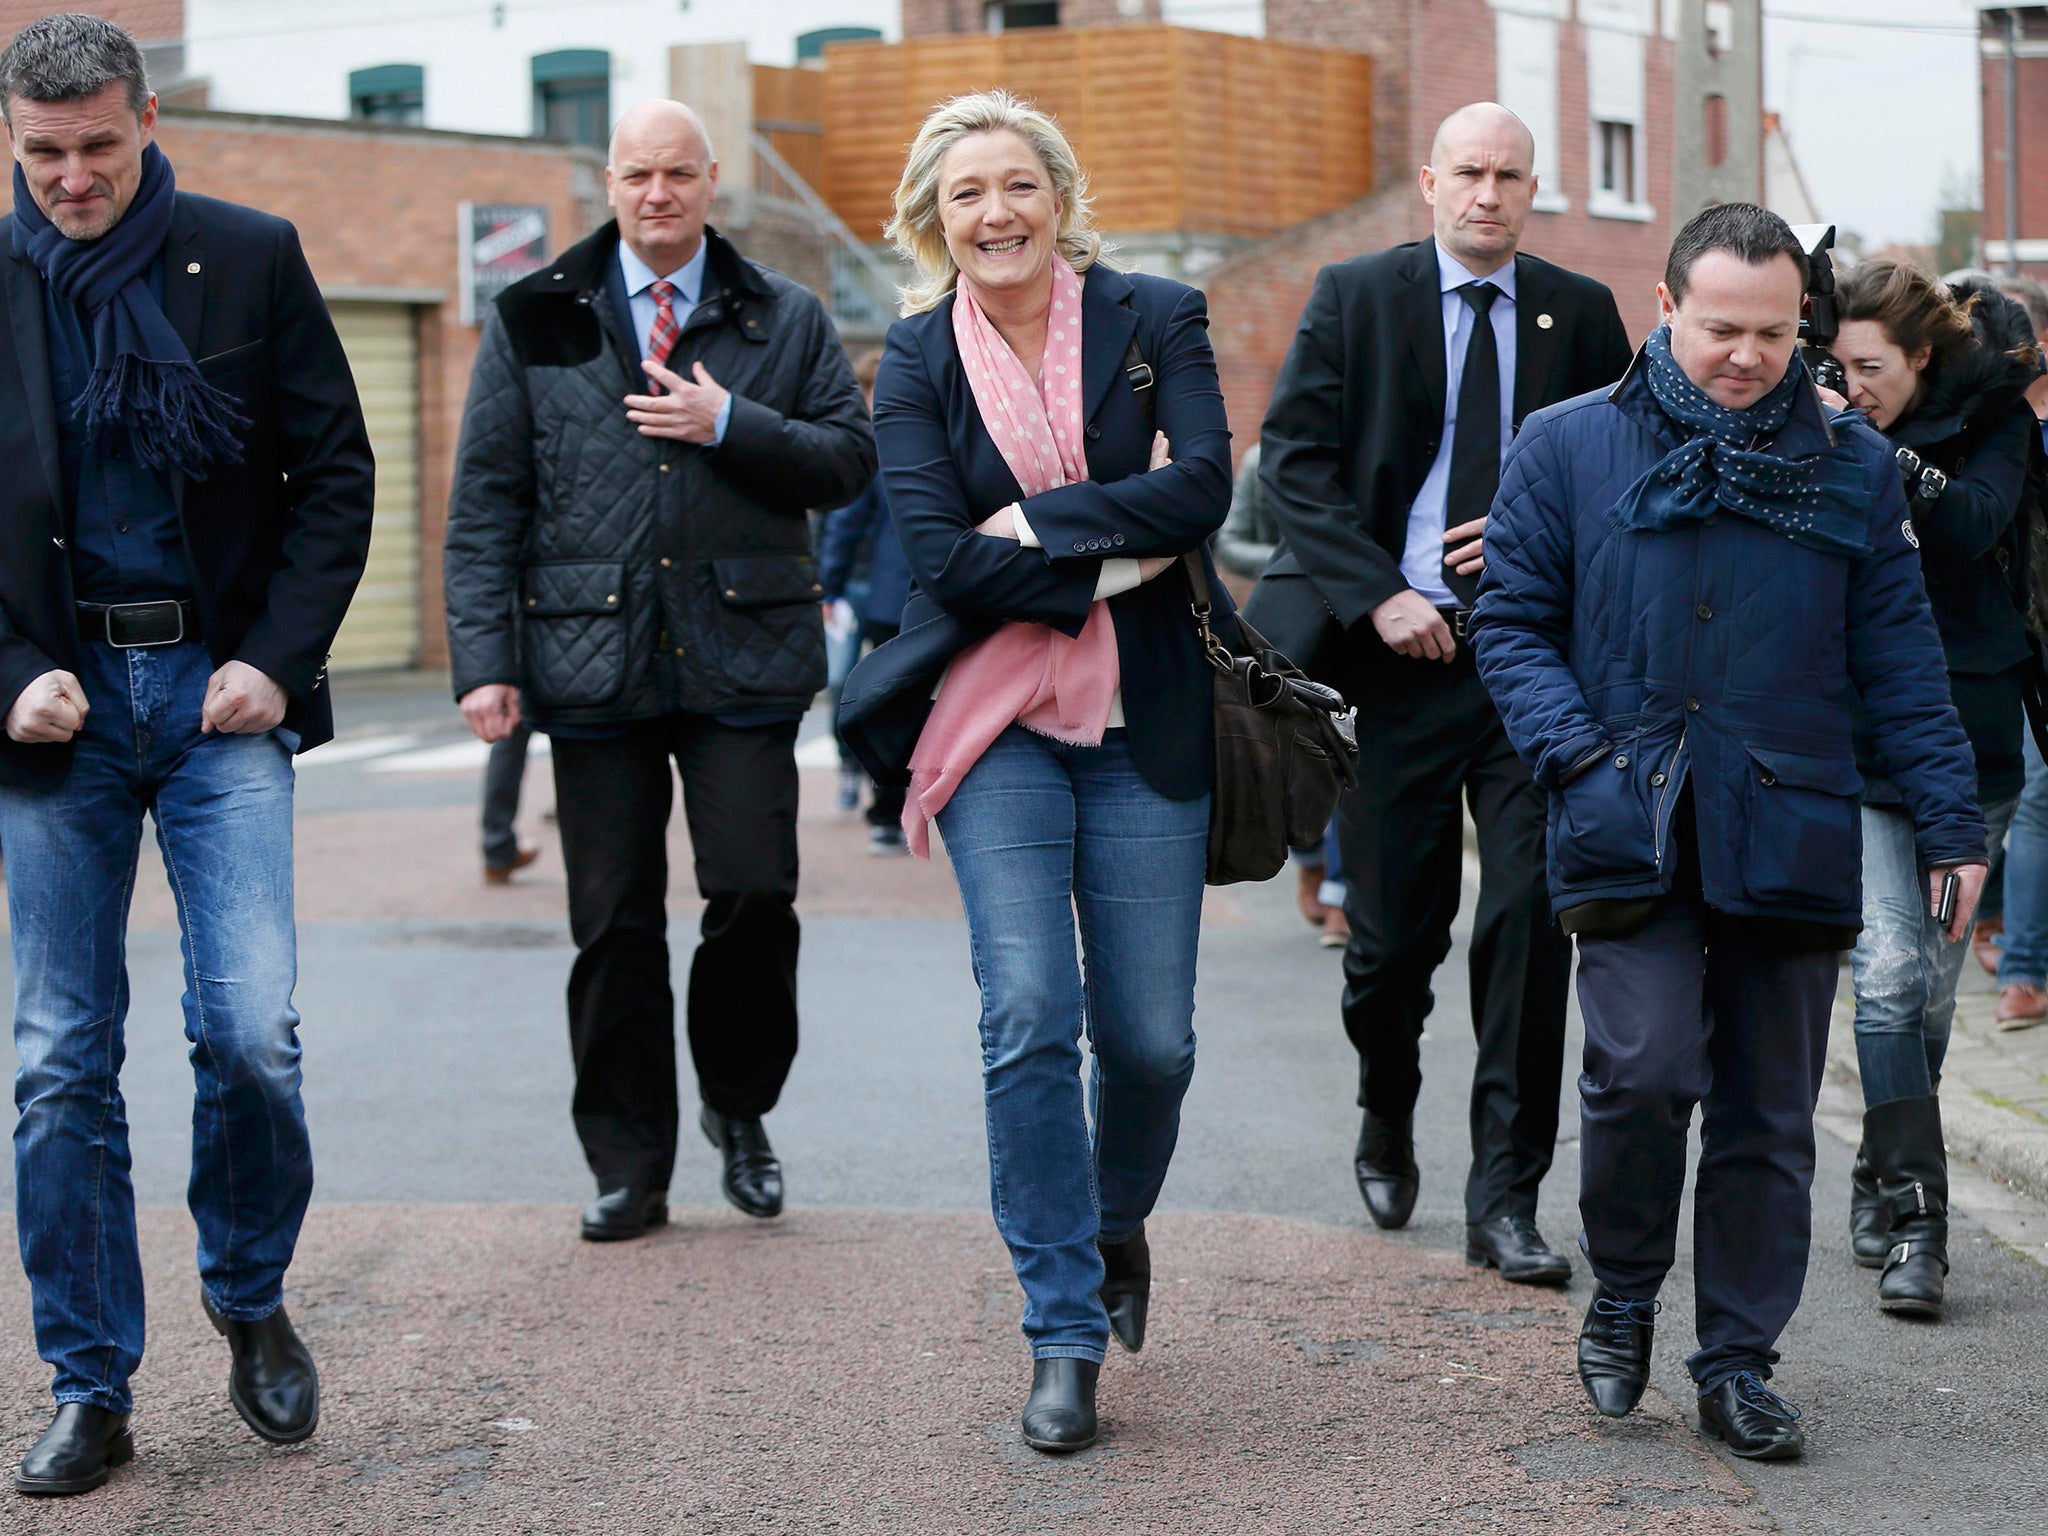 Marine Le Pen, leader of the far-right Front National party, leaves a polling station after voting in her home town of Henin-Beaumont, in the Pas-de-Calais area of northern France